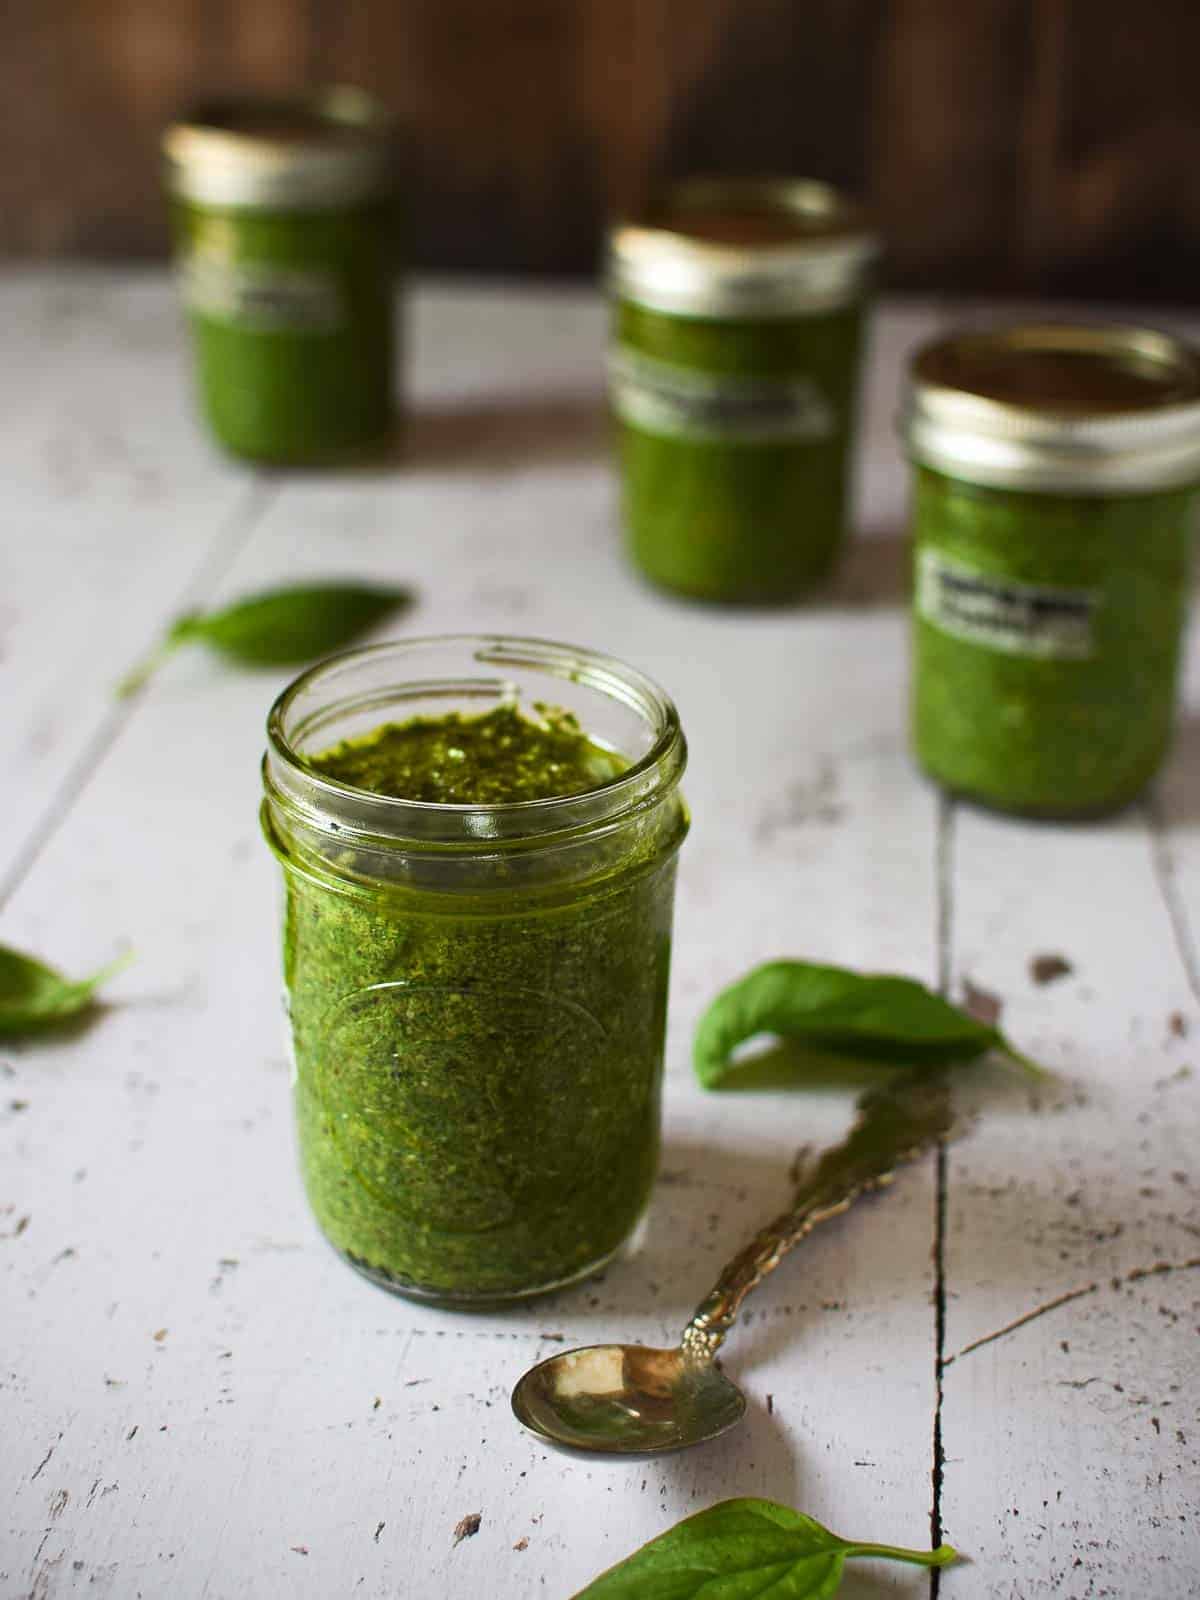 Multiple jars of pesto sauce in clear jars on a wooden surface.